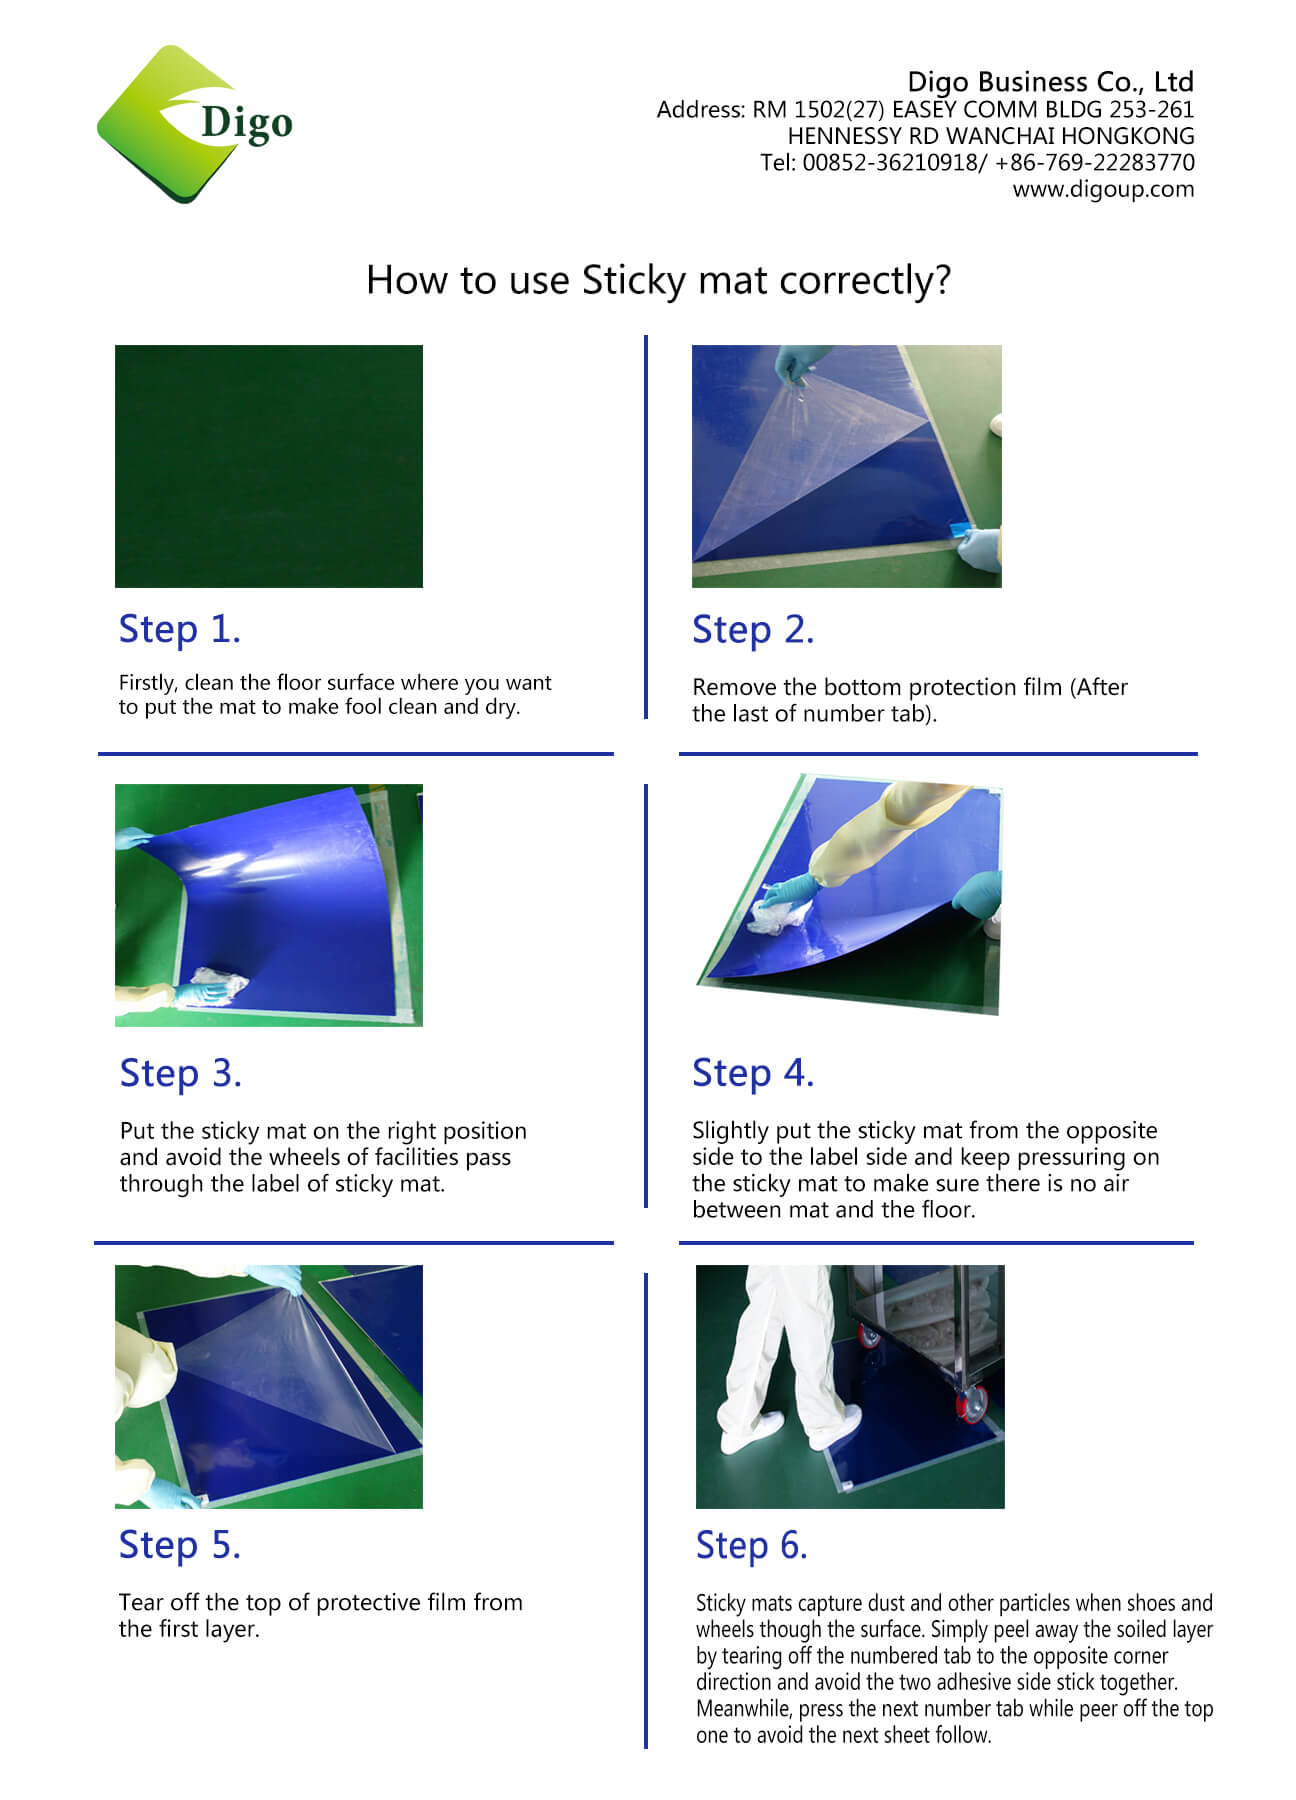 Tips for using sticky mat